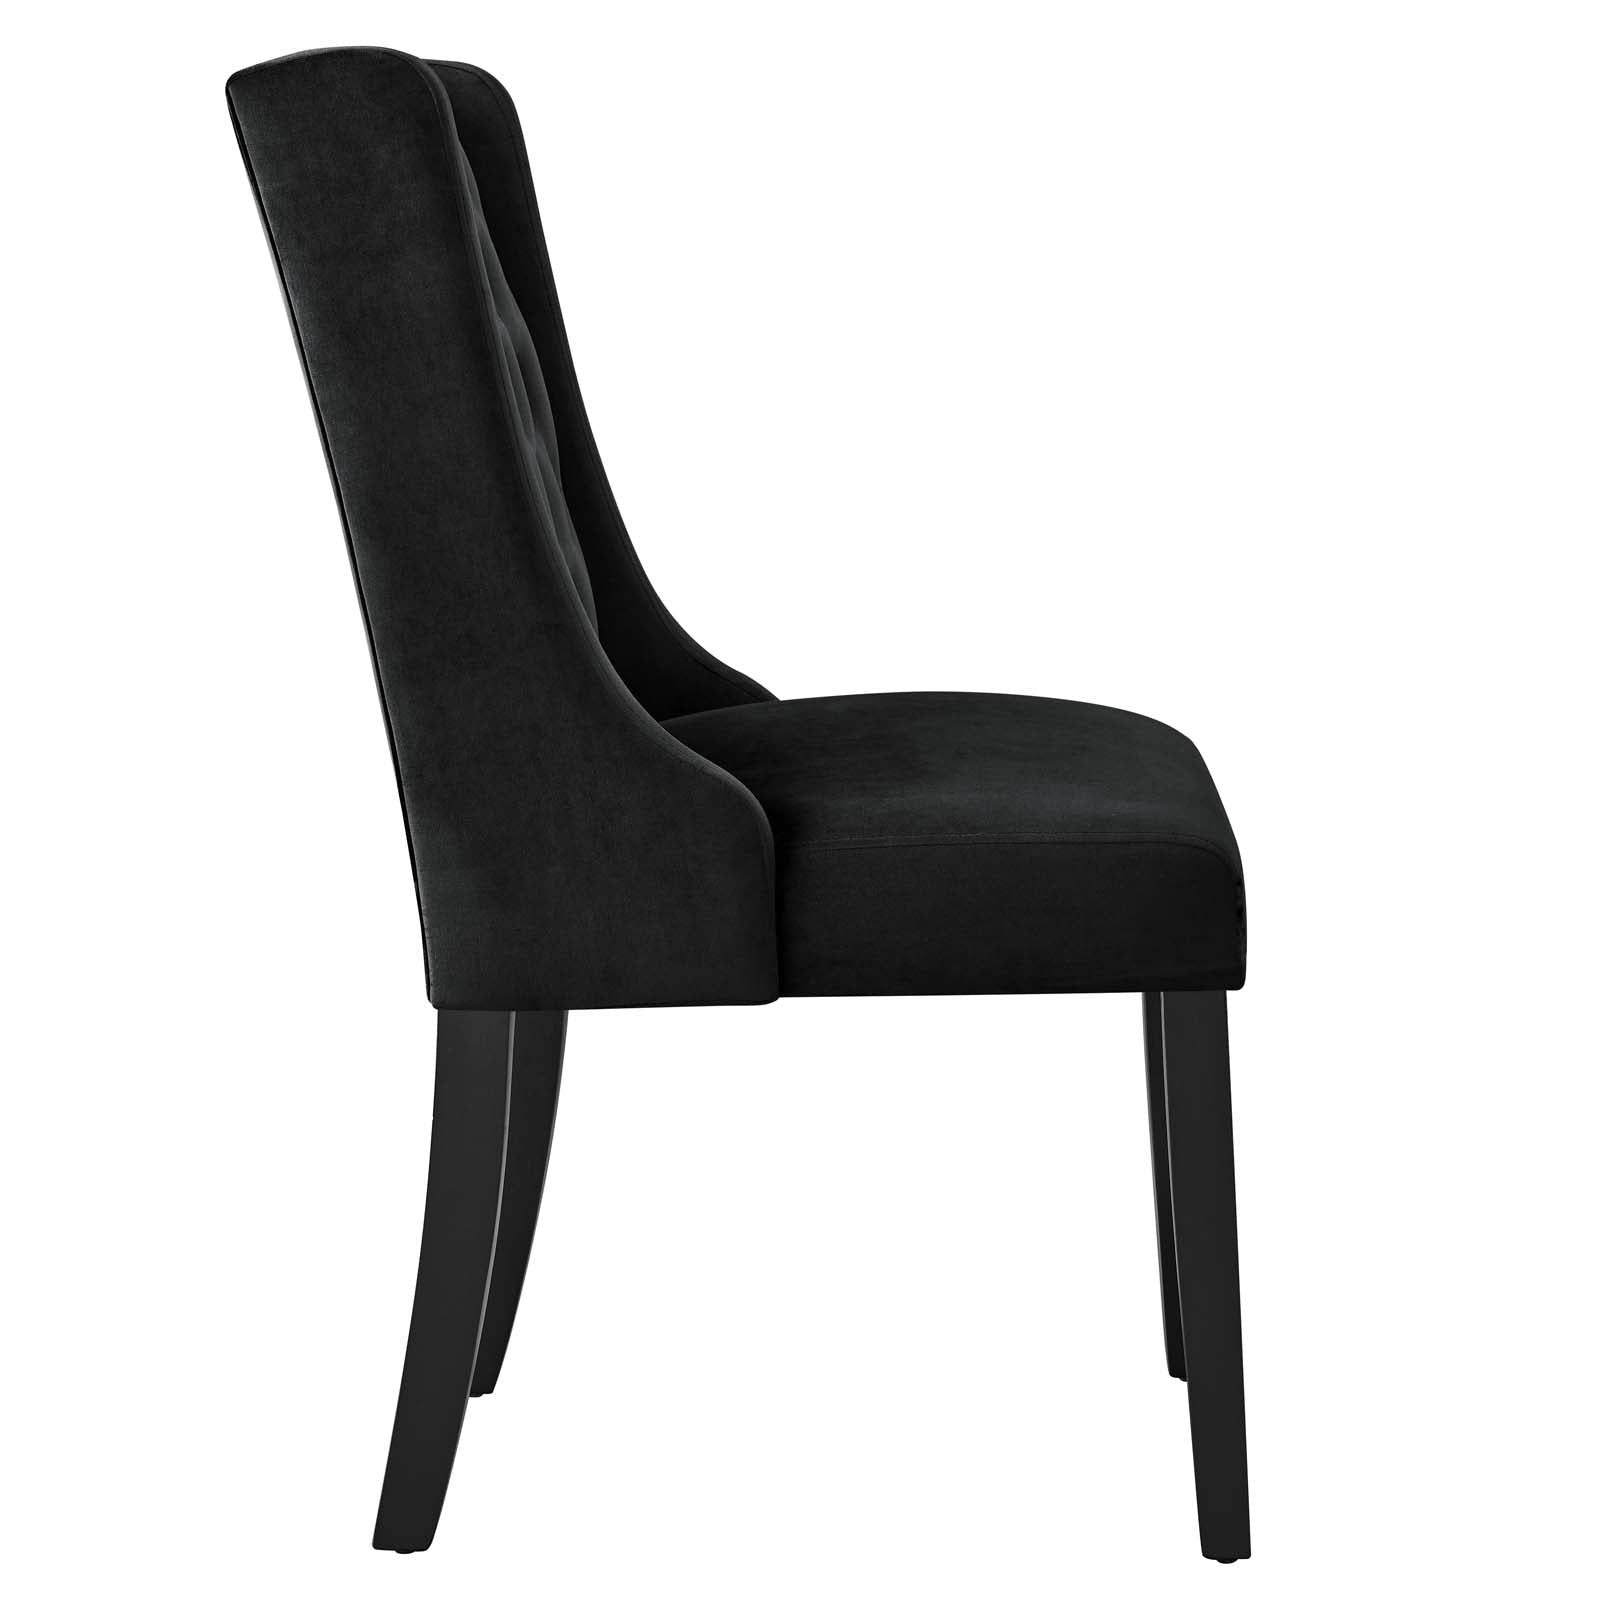 Modway Dining Chairs - Baronet Performance Velvet Dining Chairs - Set of 2 Black